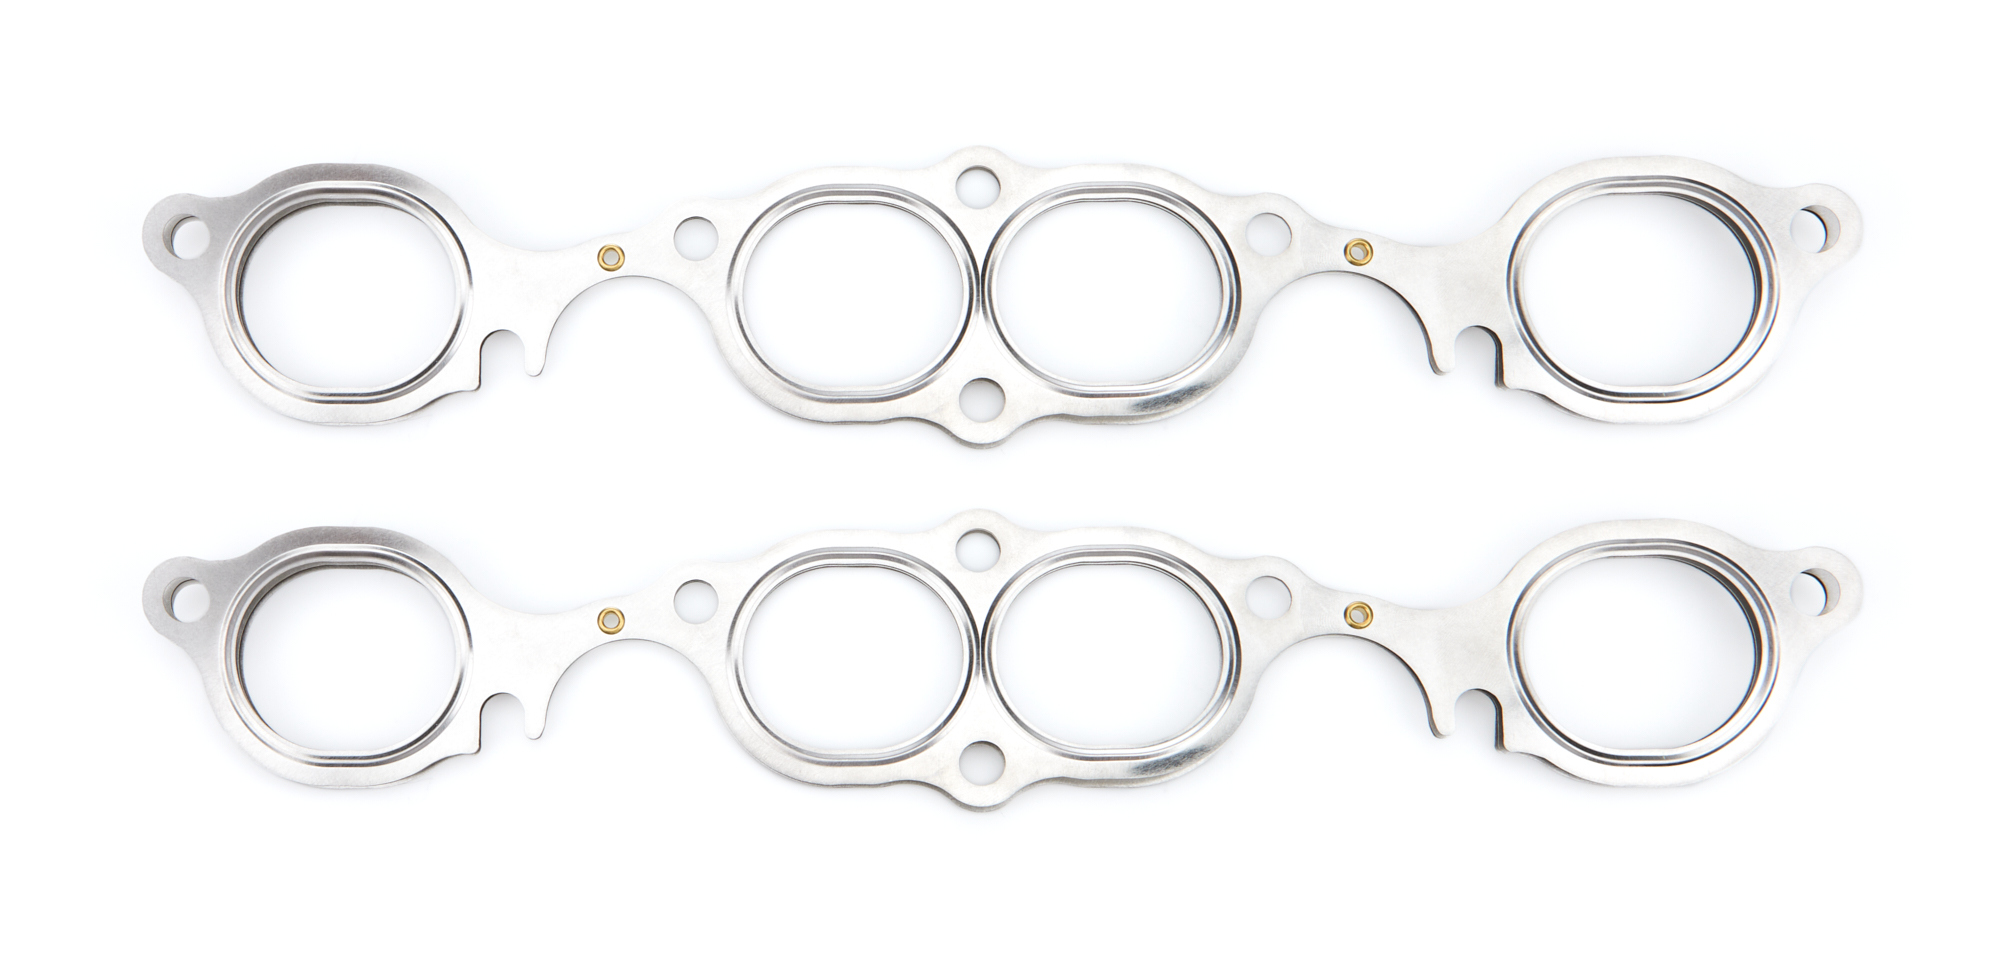 Cometic Gaskets C5836-030 - Exhaust Manifold / Header Gasket, 1.903 in Round Port, Multi-Layer Steel, SB2.2 Race Heads, Small Block Chevy, Pair